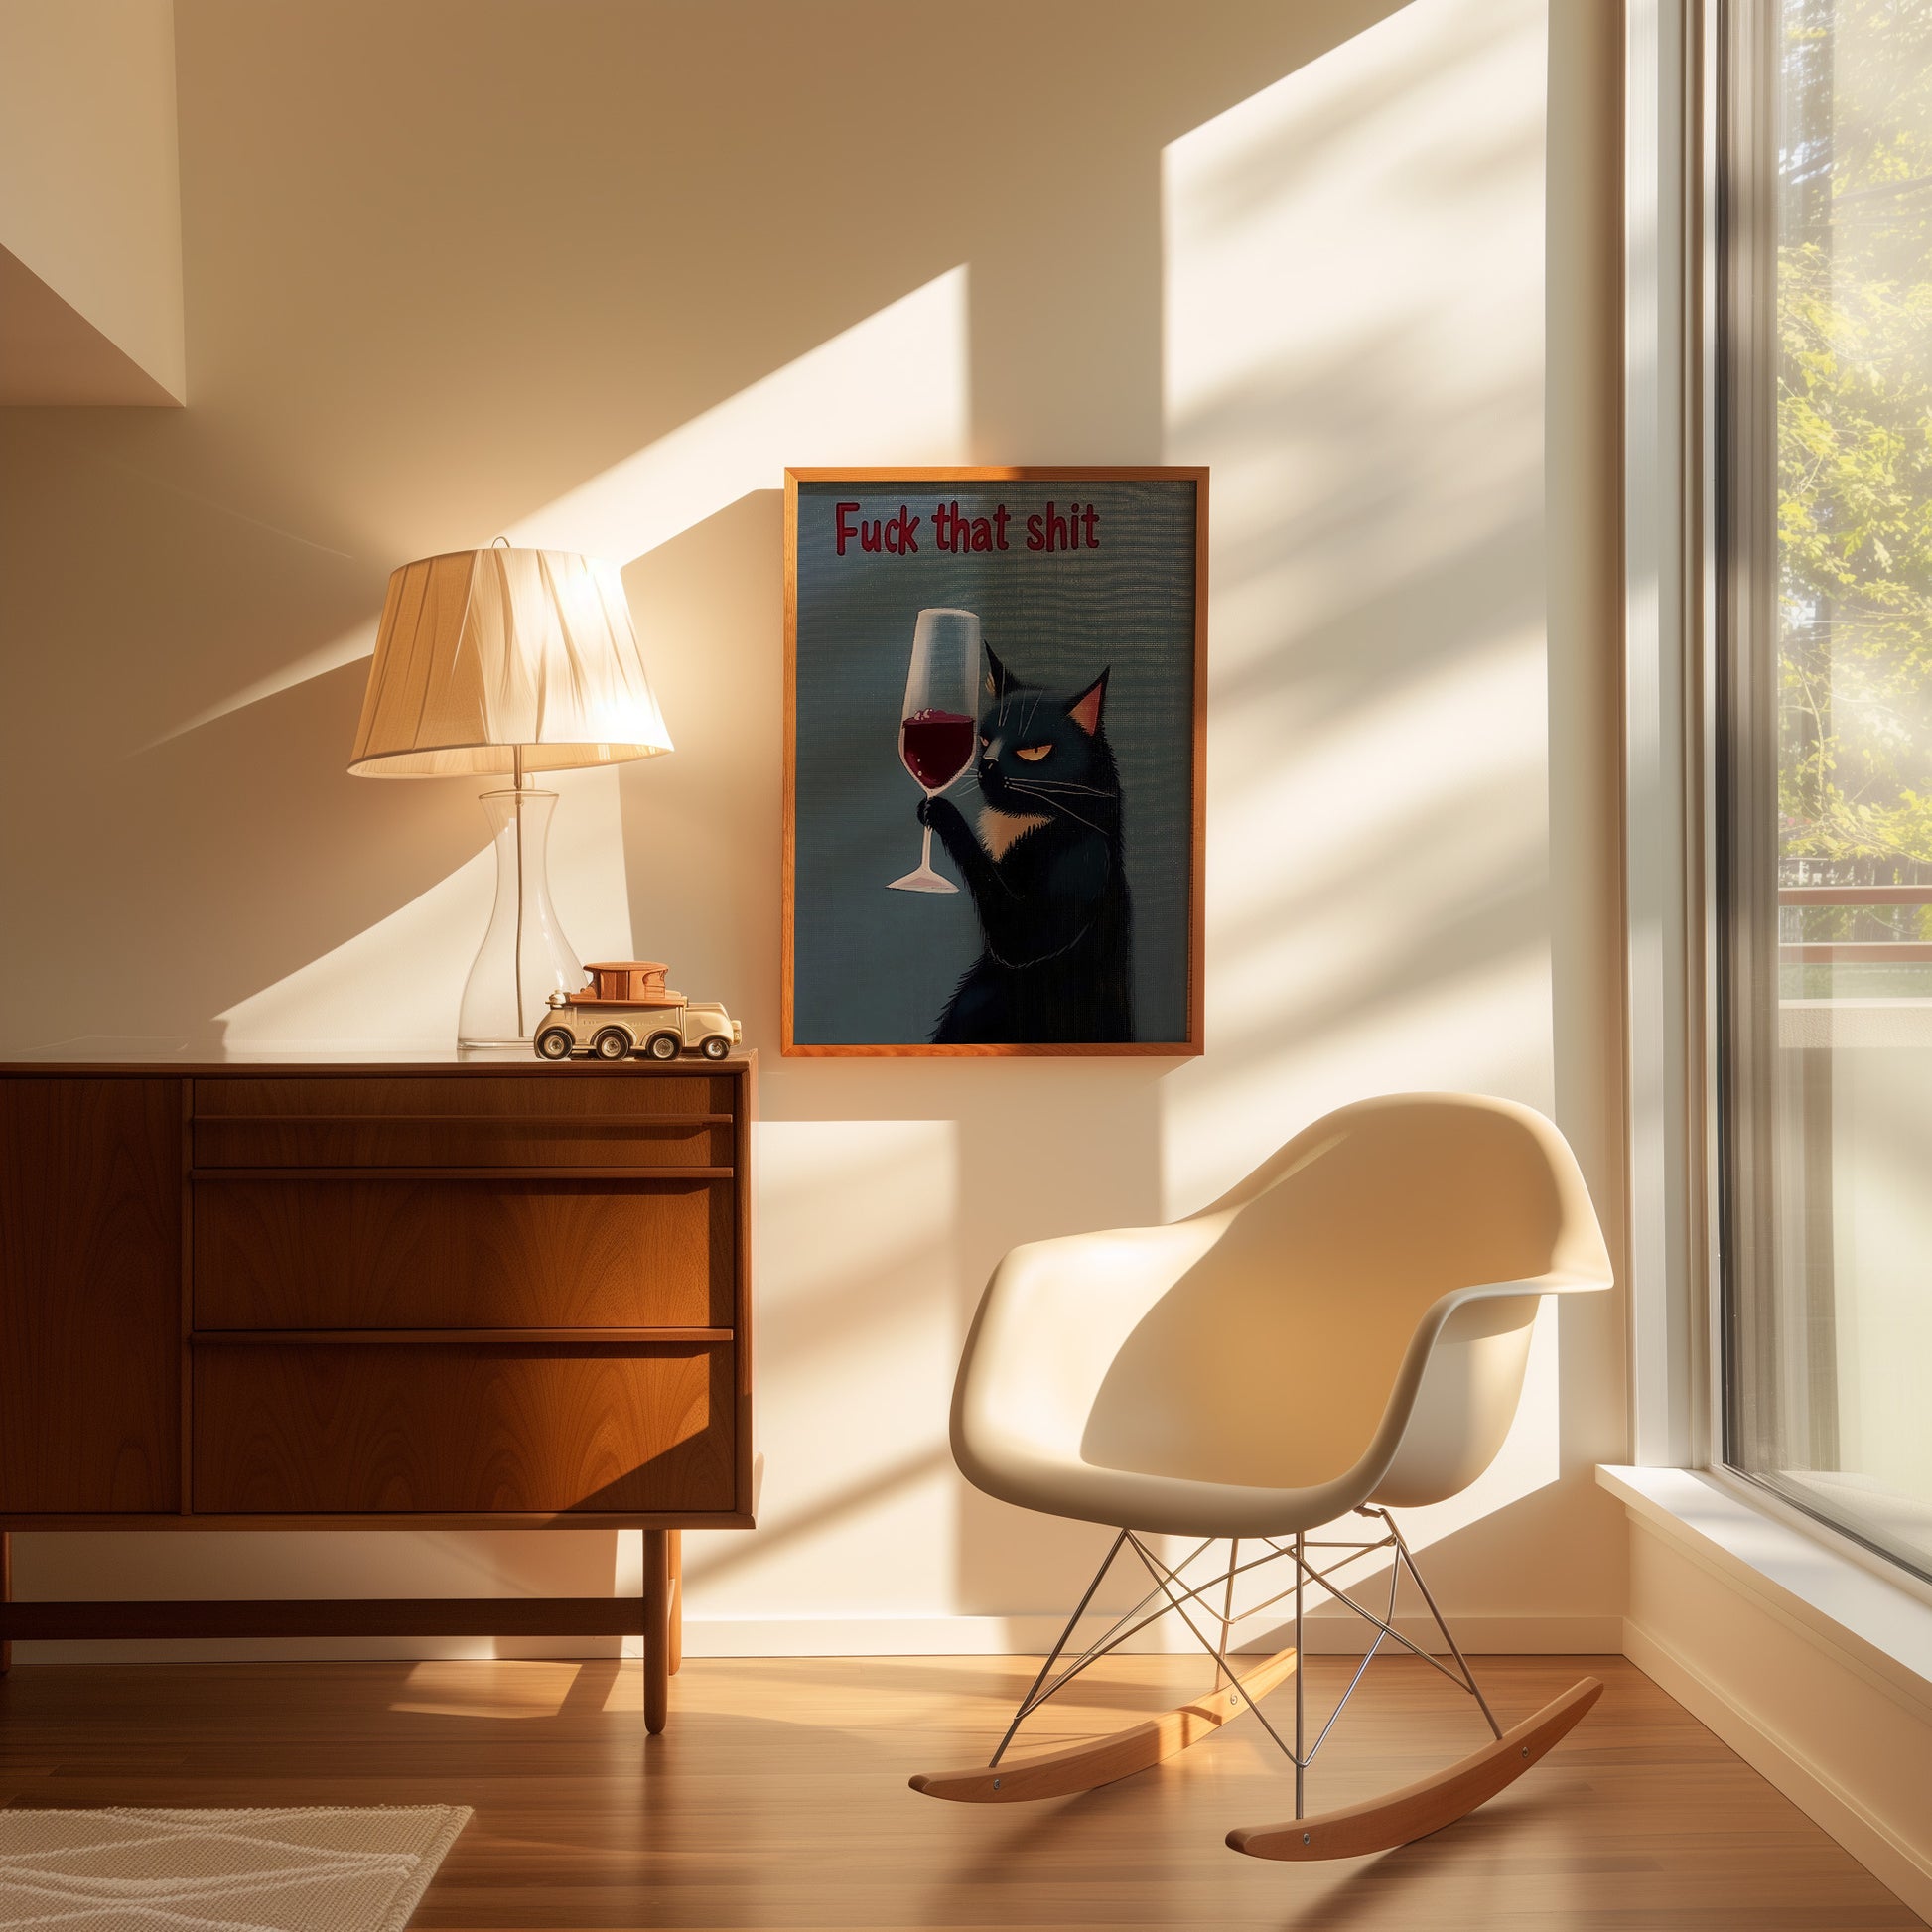 A cozy room with a rocking chair, sideboard, and a lamp, with an artwork containing explicit language.